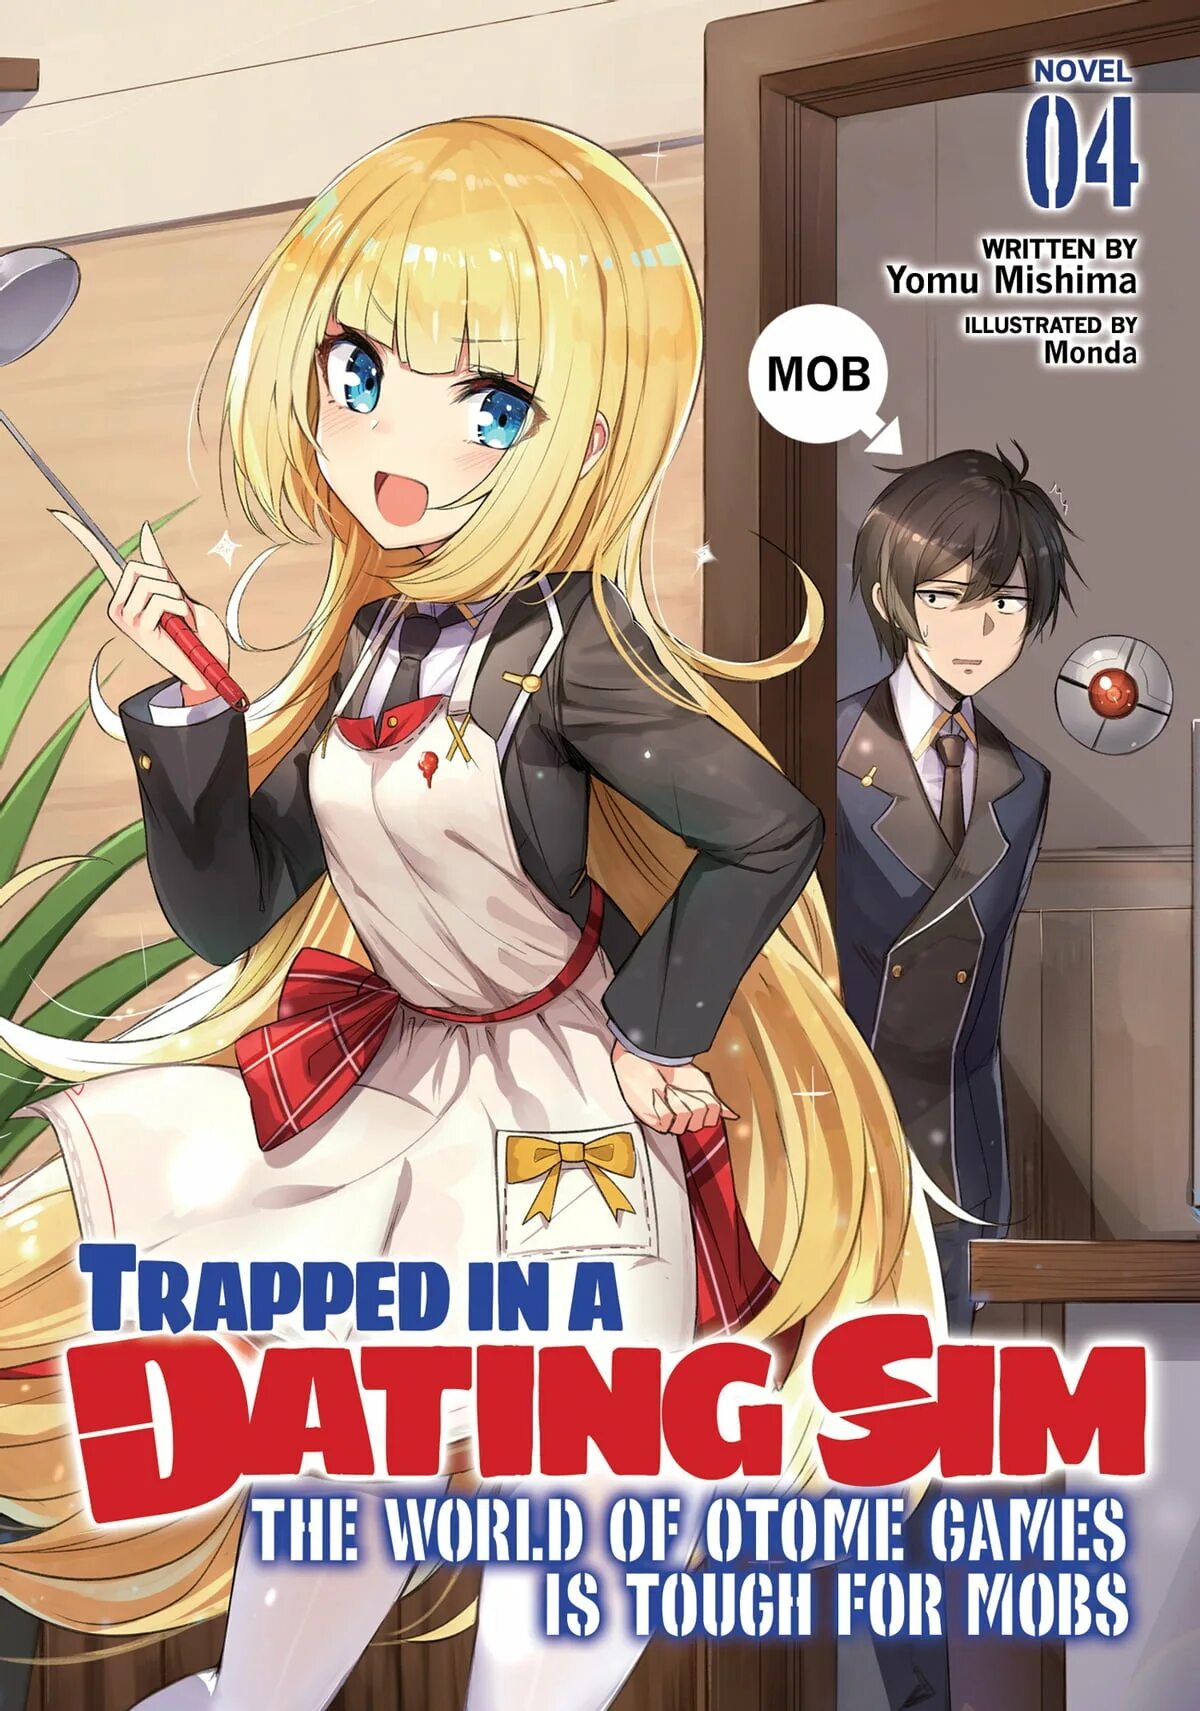 Otome games is tough for mobs. Trapped in a dating SIM: the World of Otome games is tough for Mobs Light novel. The World of Otome games is tough for Mobs novel. Trapped in a dating SIM: the World of Otome gam. Манга Trapped in dating SIM the World of Otome game is tough for Mobs.